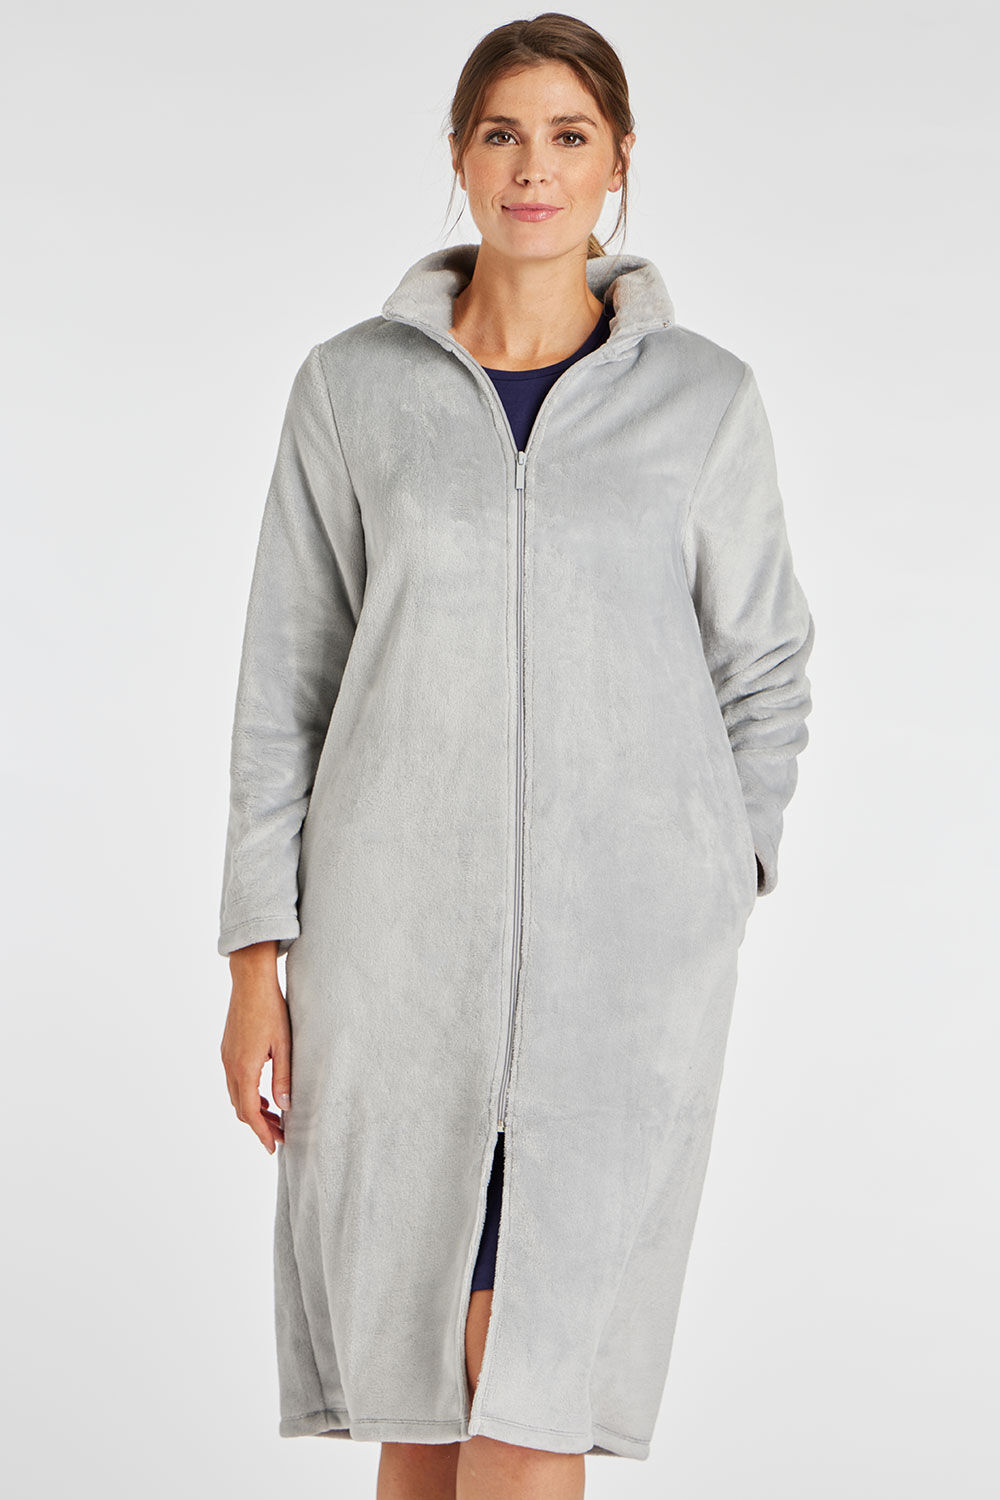 Dressing Gowns | Hooded & Zip Up Bathrobes | Freemans